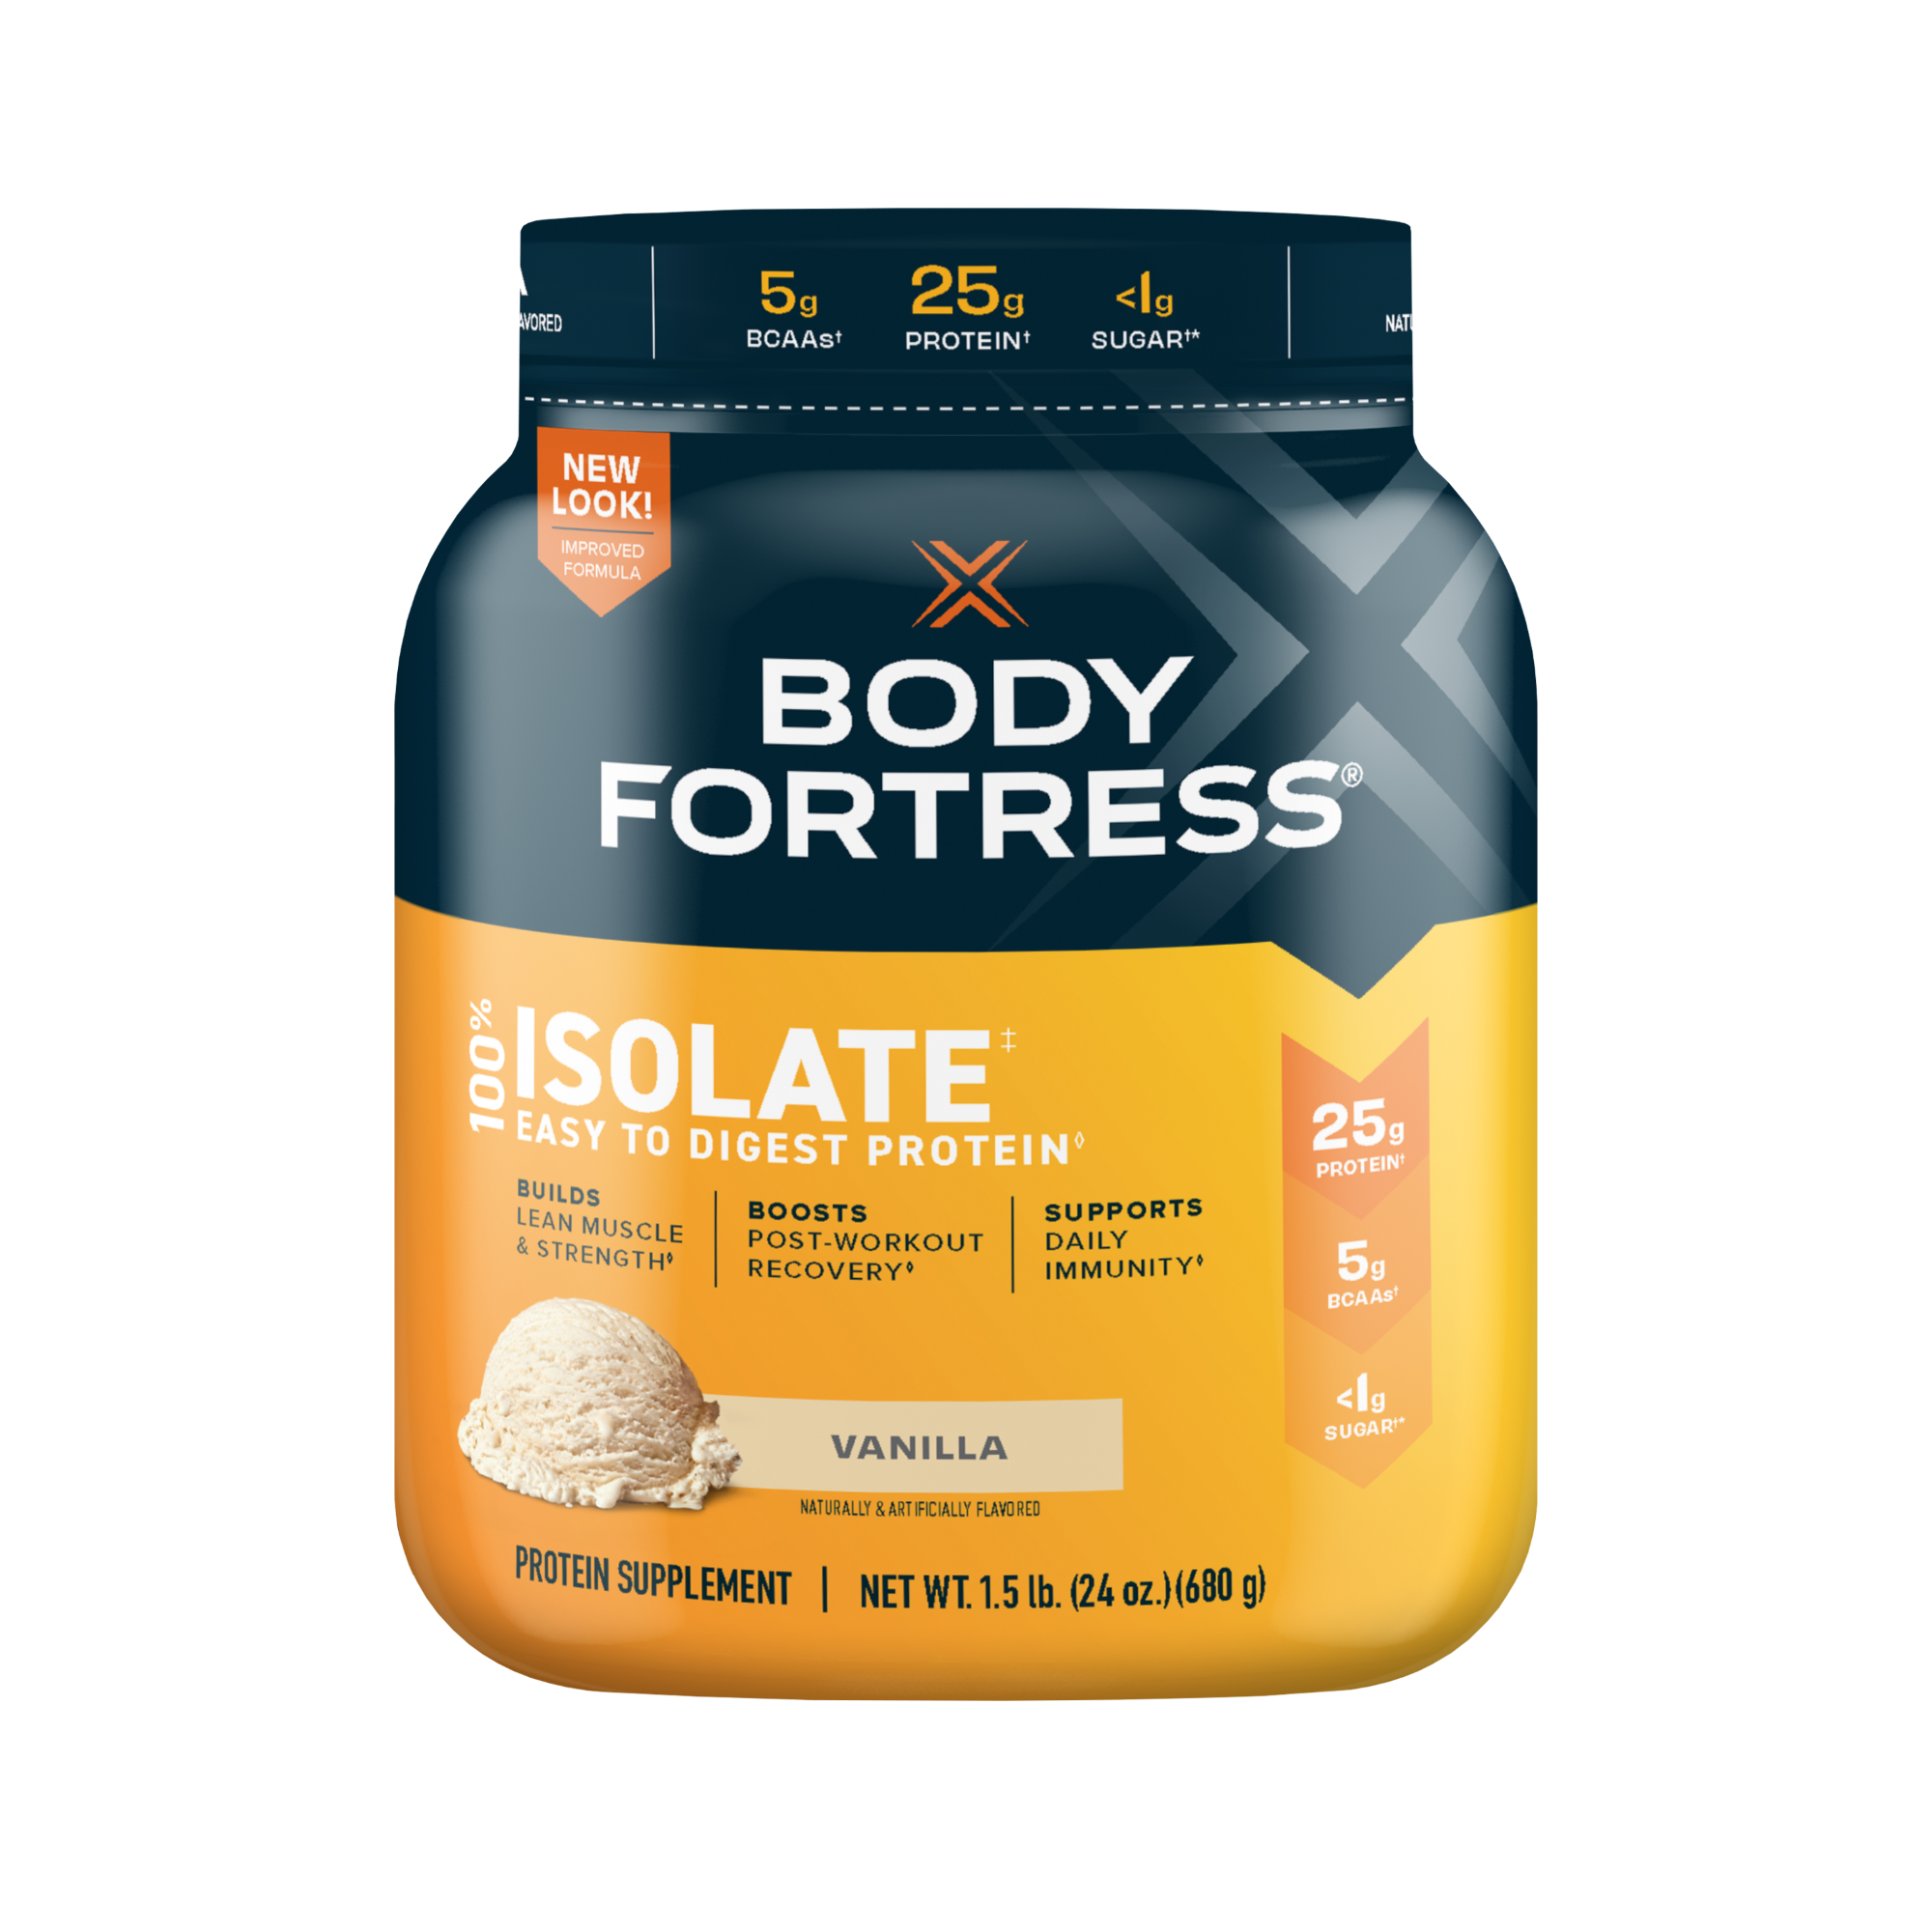 Body Fortress 100% Isolate Easy-to-Digest Protein Powder, Vanilla, 1.5lbs - image 1 of 8